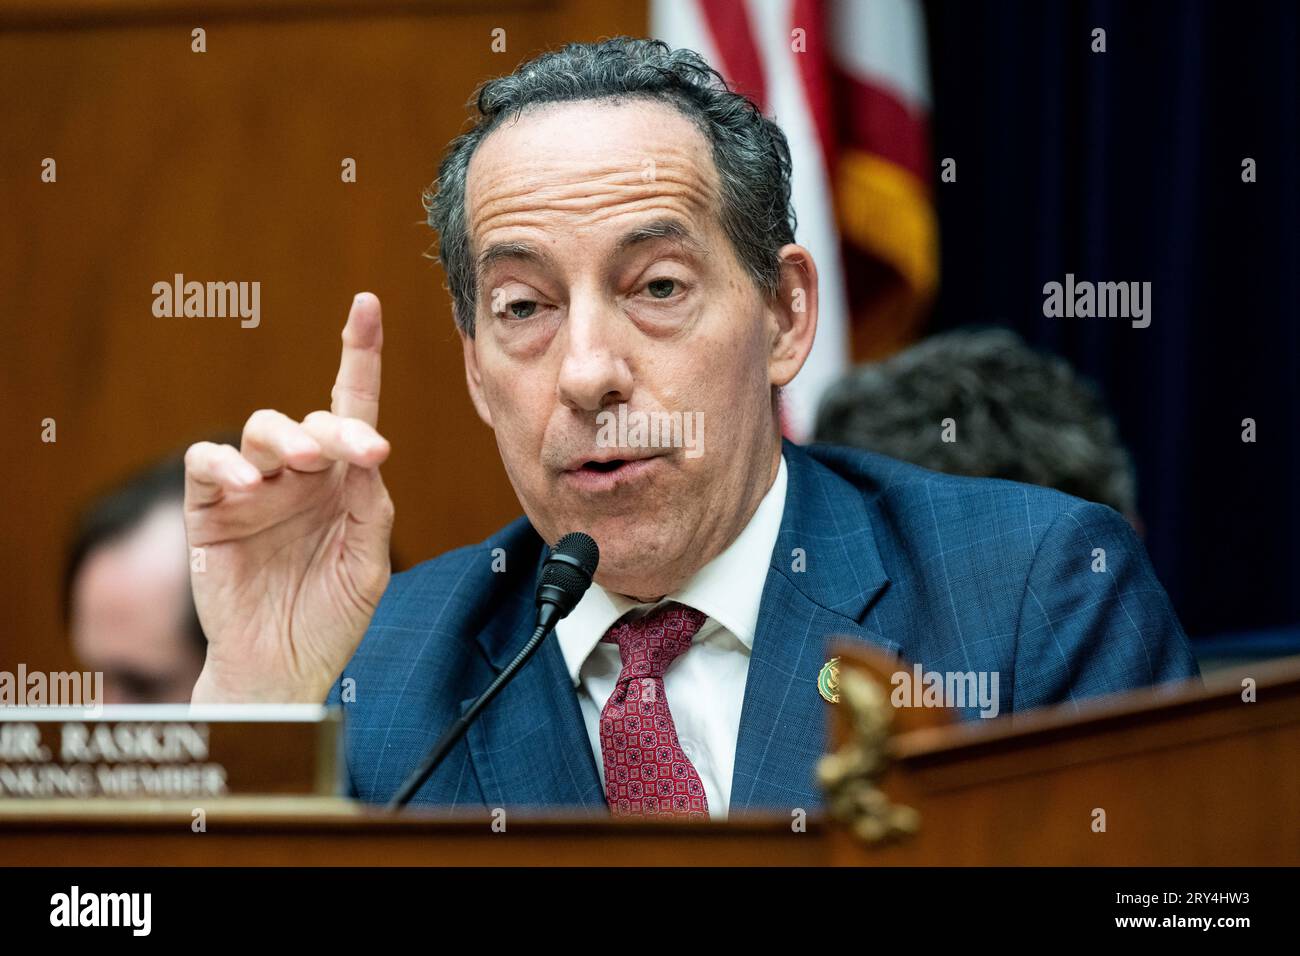 Washington, United States. 28th Sep, 2023. U.S. Representative Jamie Raskin (D-MD) speaking at a House Committee Oversight and Accountability Committee hearing titled 'The Basis for an Impeachment Inquiry of President Joseph R. Biden Jr.' at the U.S. Capitol. (Photo by Michael Brochstein/Sipa USA) Credit: Sipa USA/Alamy Live News Stock Photo